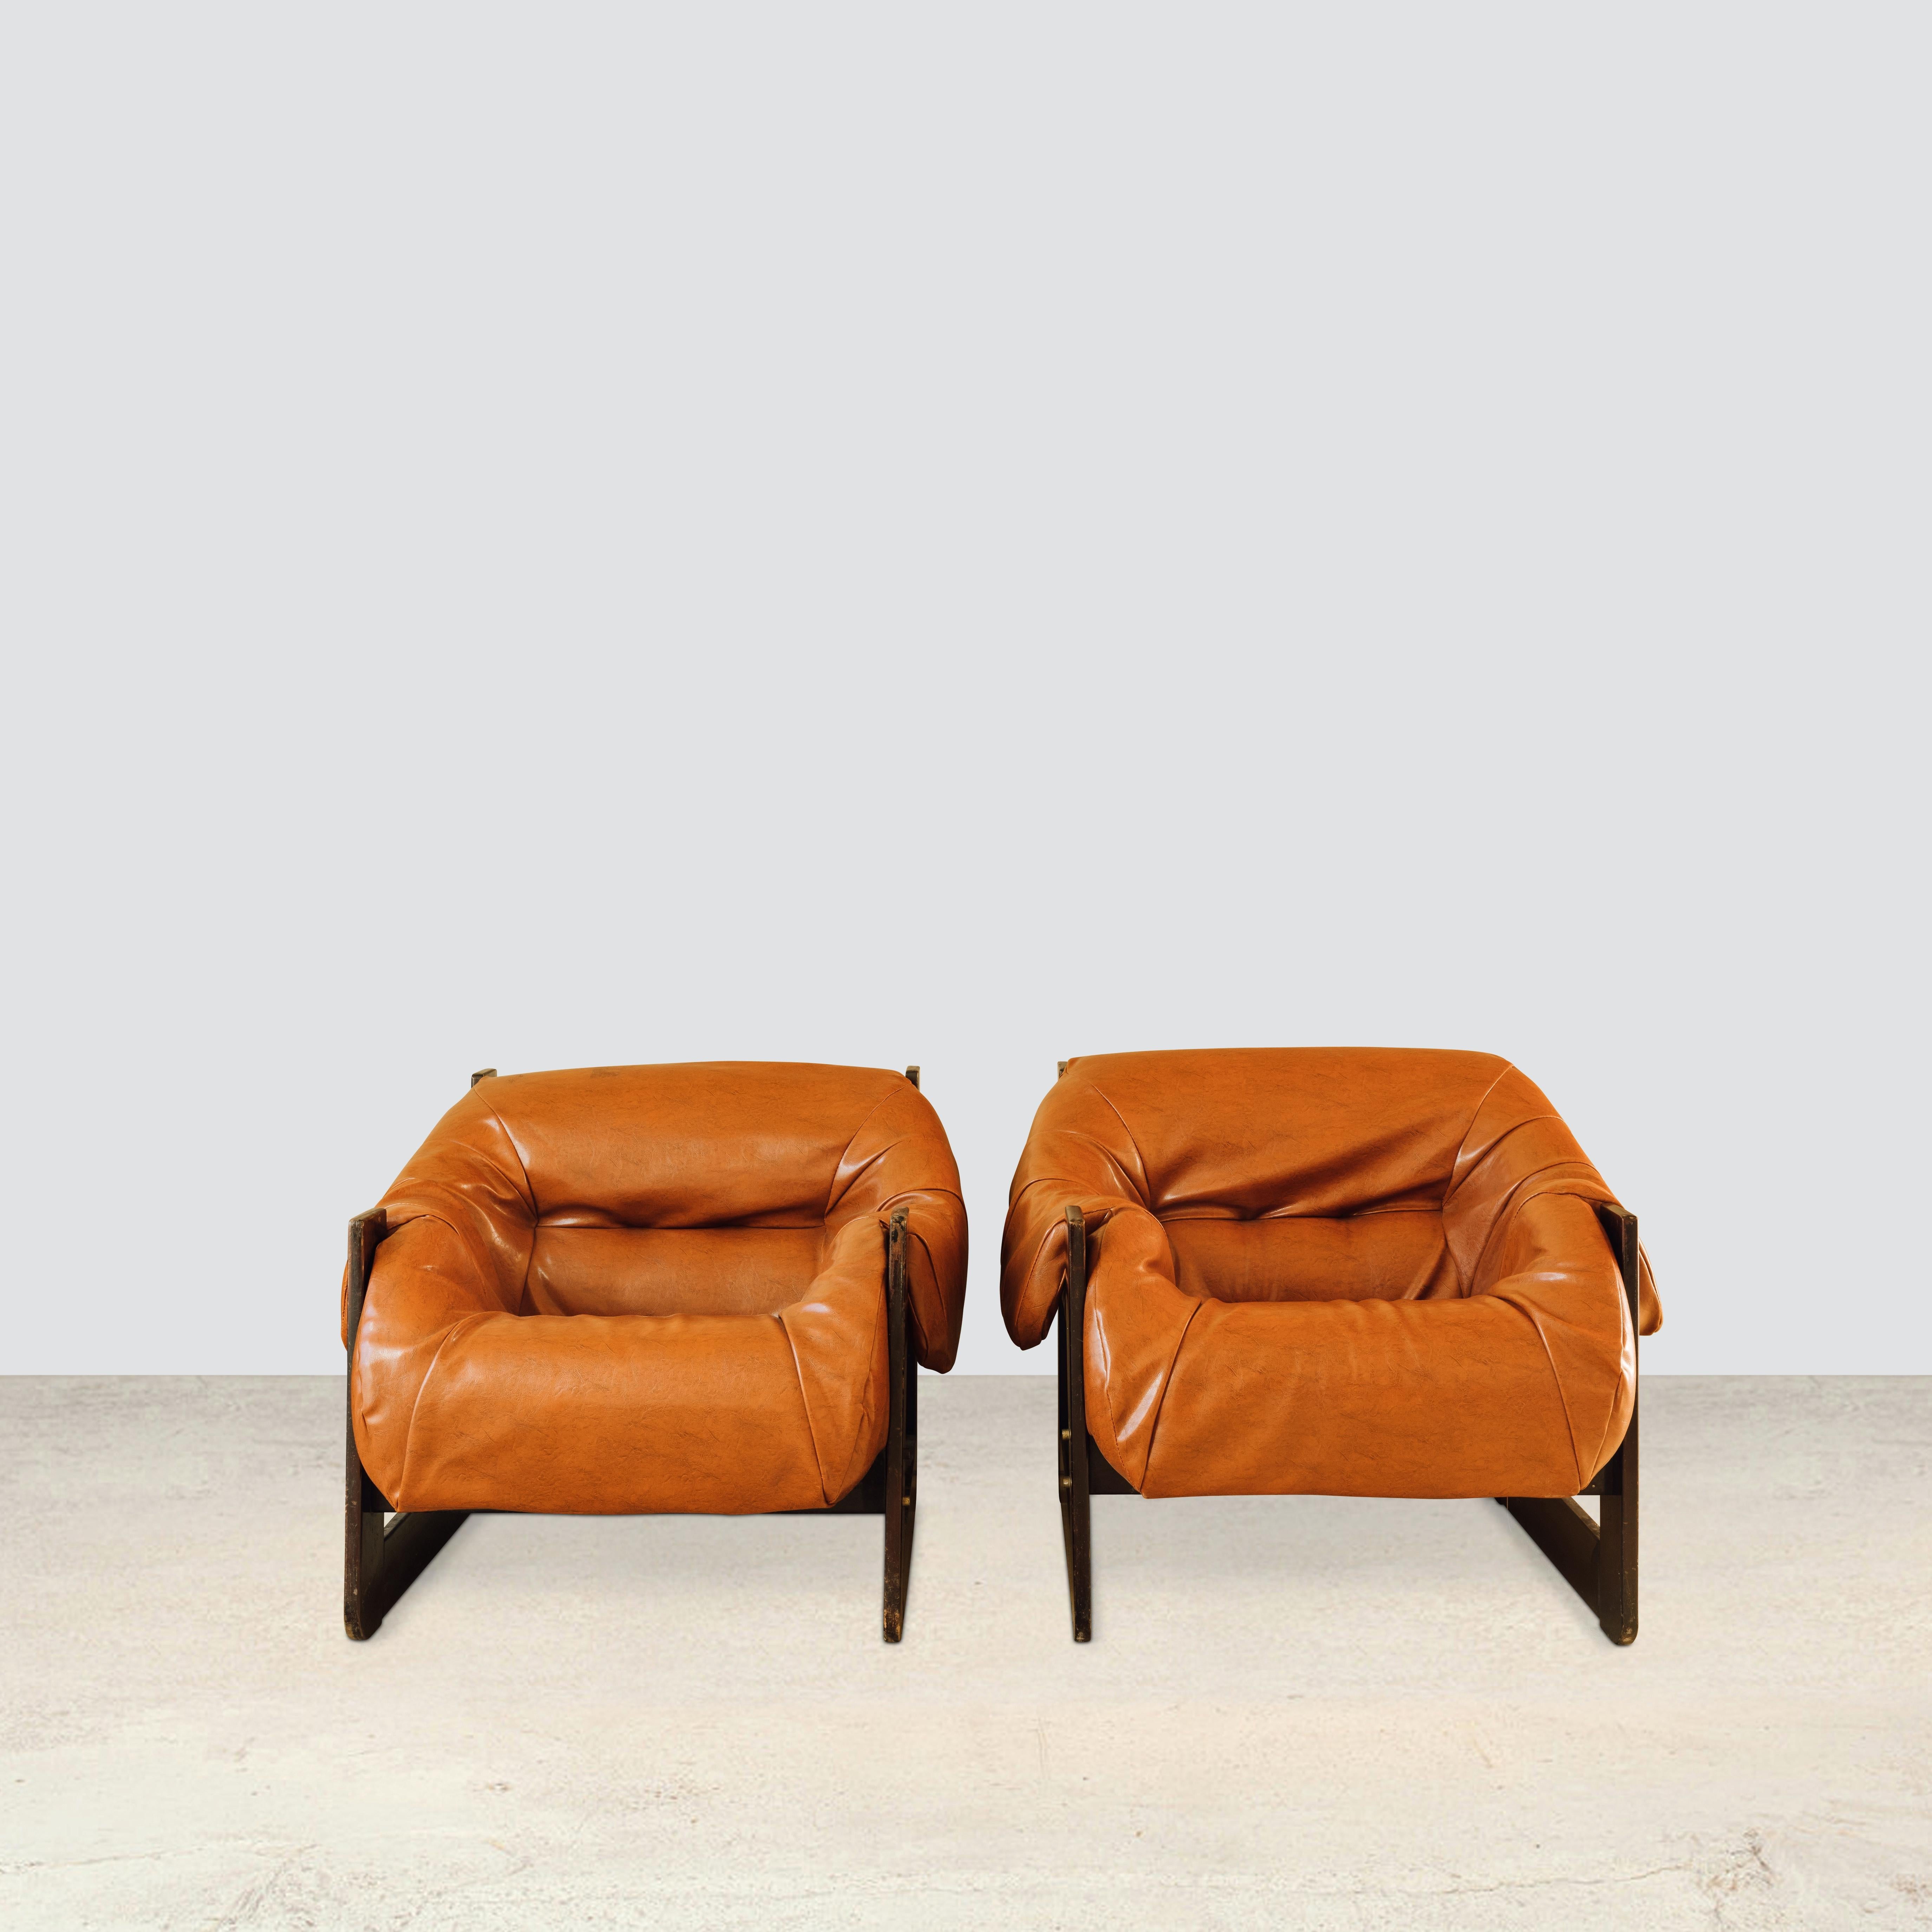 MP97 Armchair
By Percival Lafer 1970

Beautiful pair of brown lounge armchairs in brown Leather and Jatoba by Percival Lafer. Percival Lafer is an iconic contemporary Brazilian furniture maker and pioneer of the Brazilian Modernist movement. He